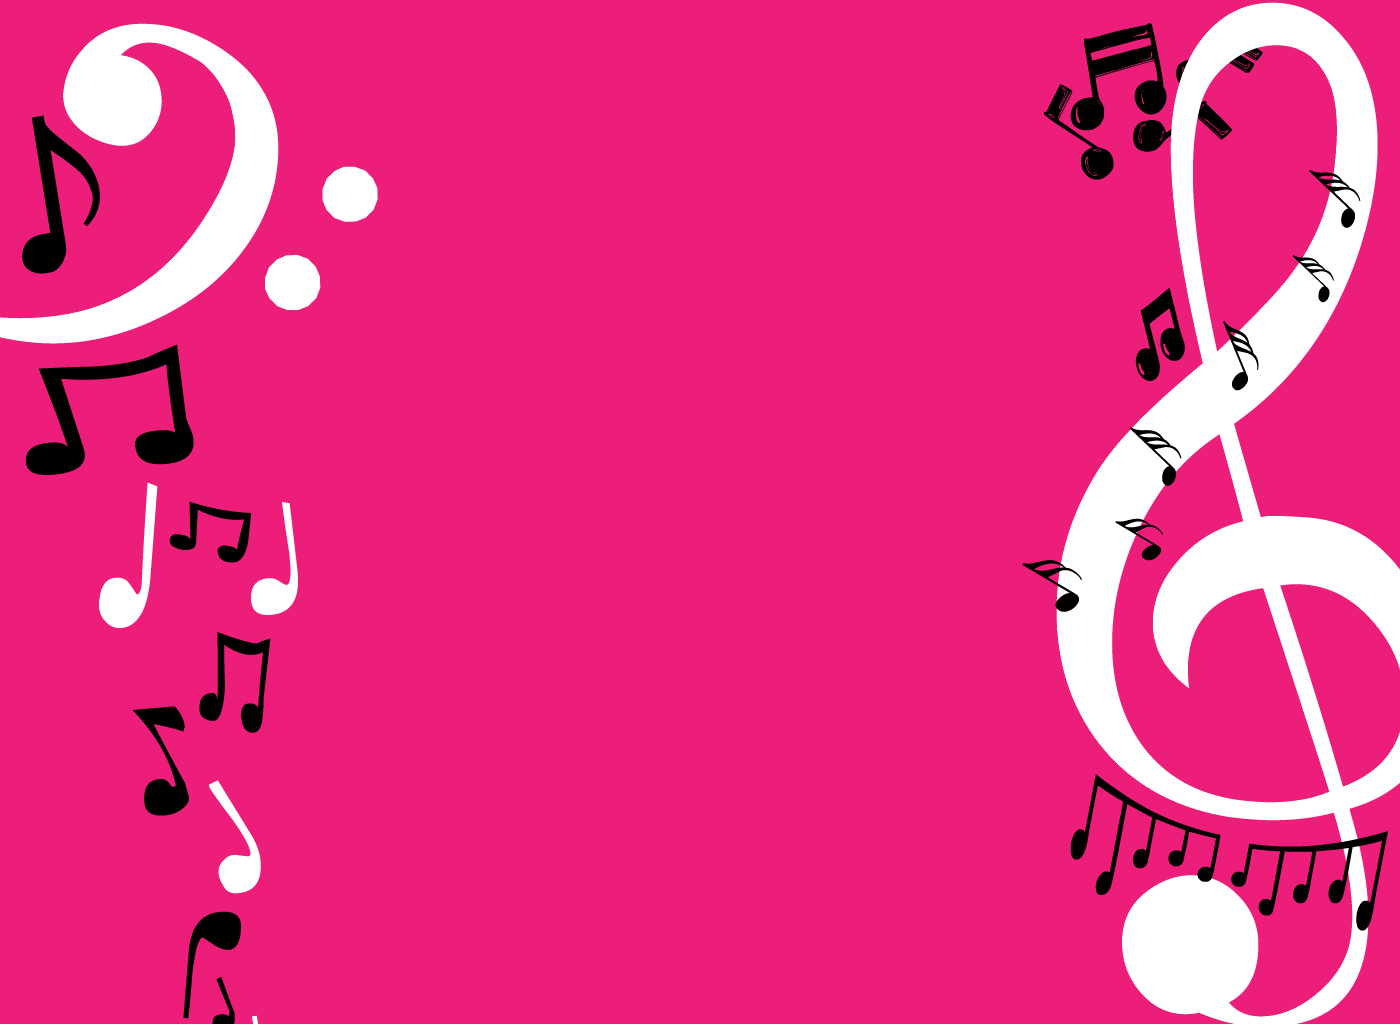 musical-notes-pink-backgrounds-wallpapers.jpg (1400×1024)